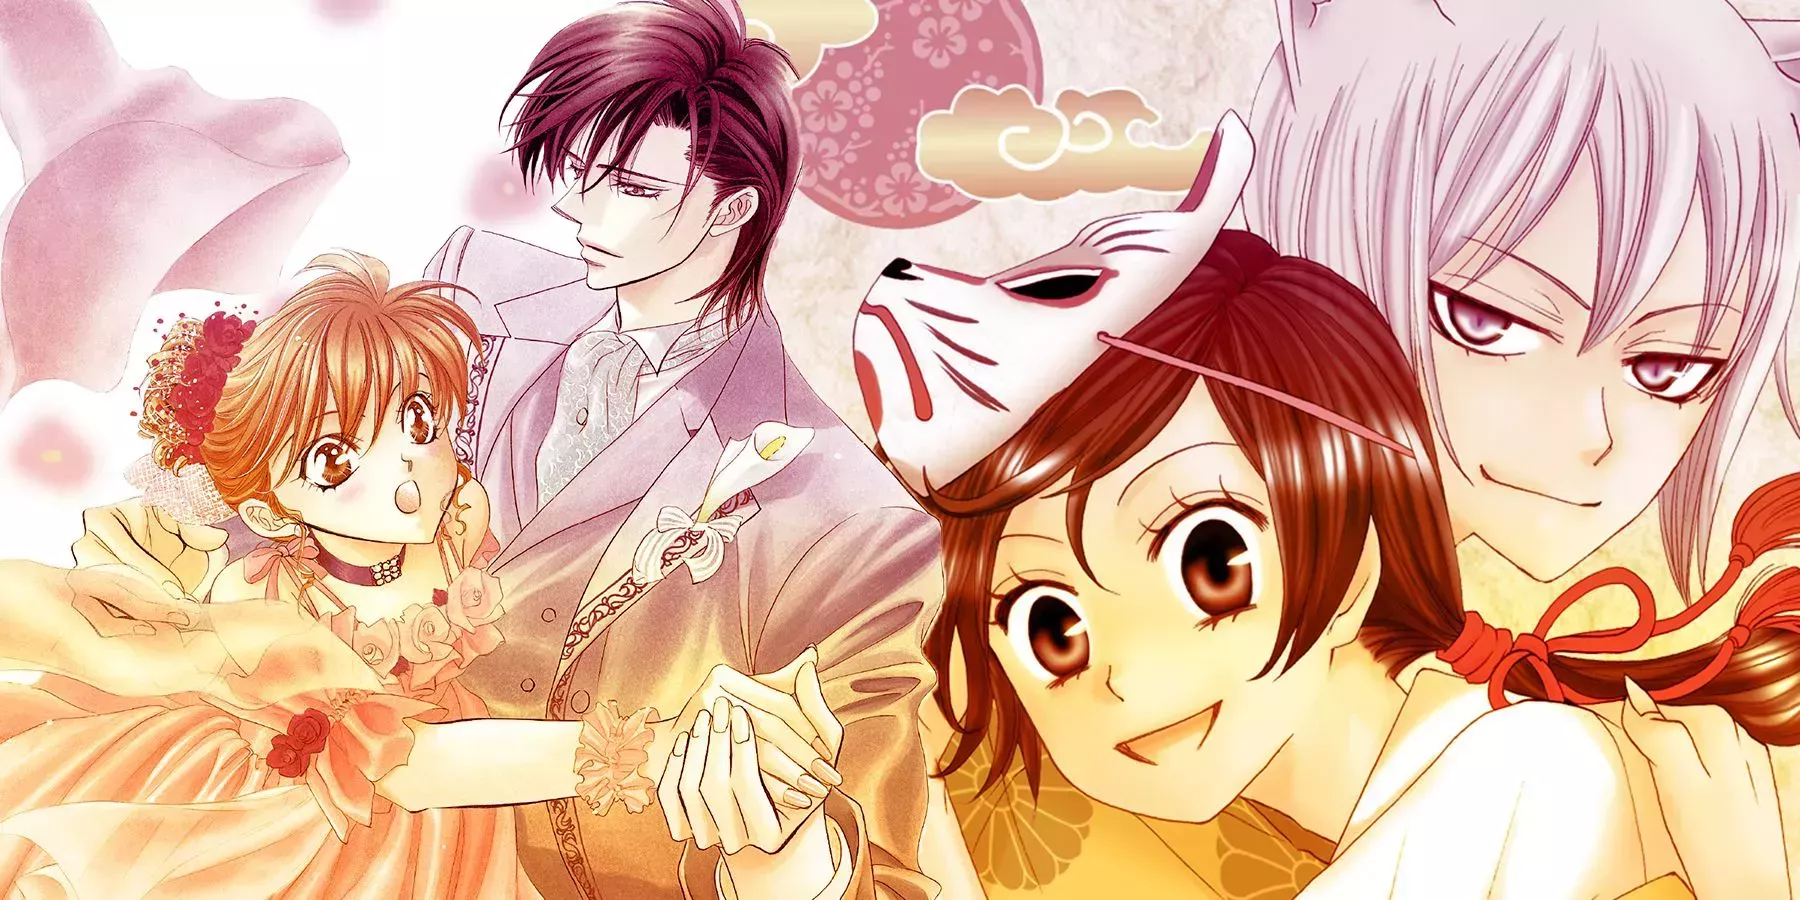 A collage of romance manga characters dancing together.